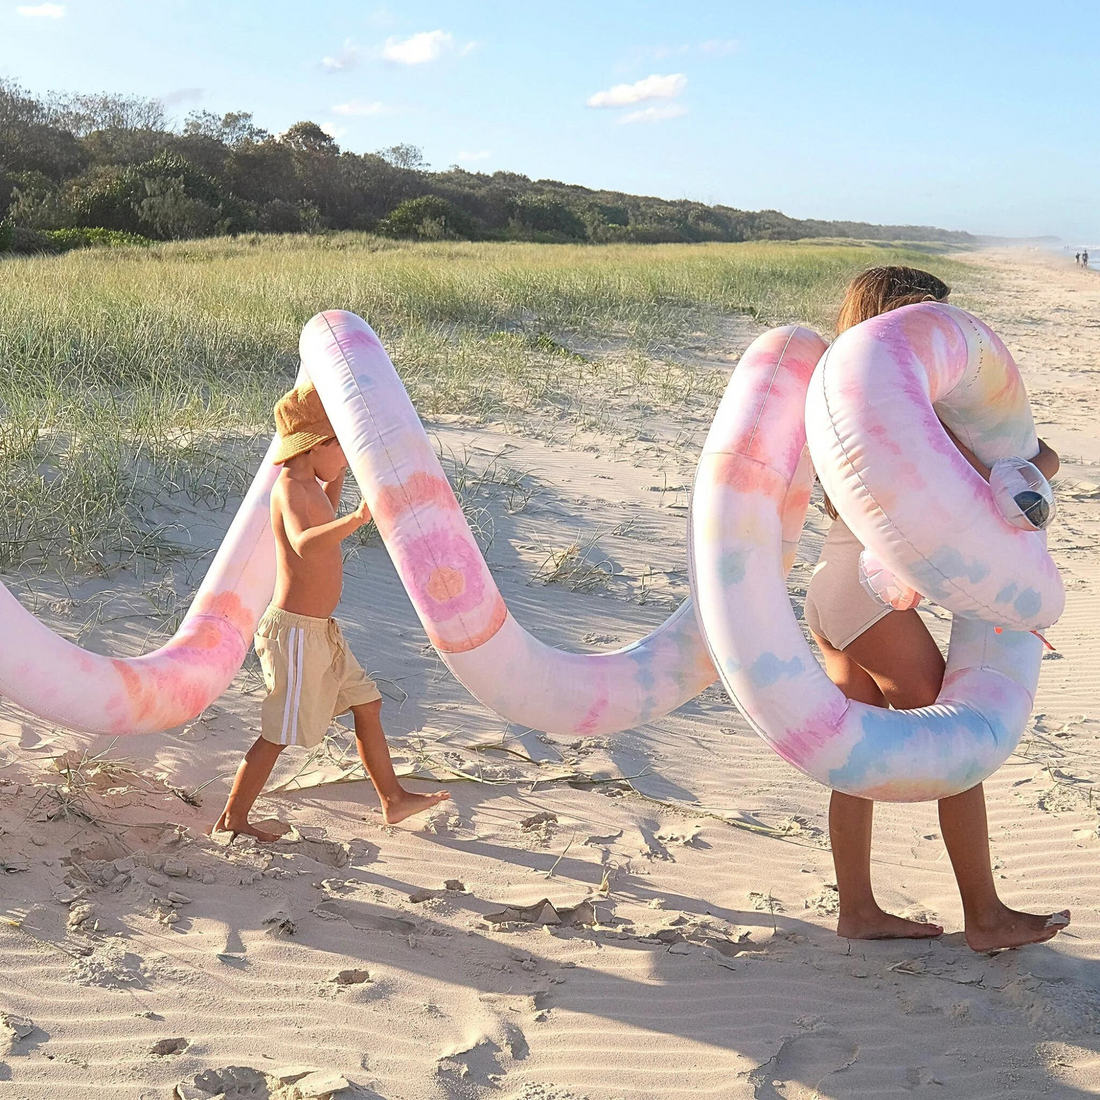 Giant inflatable spiral snake